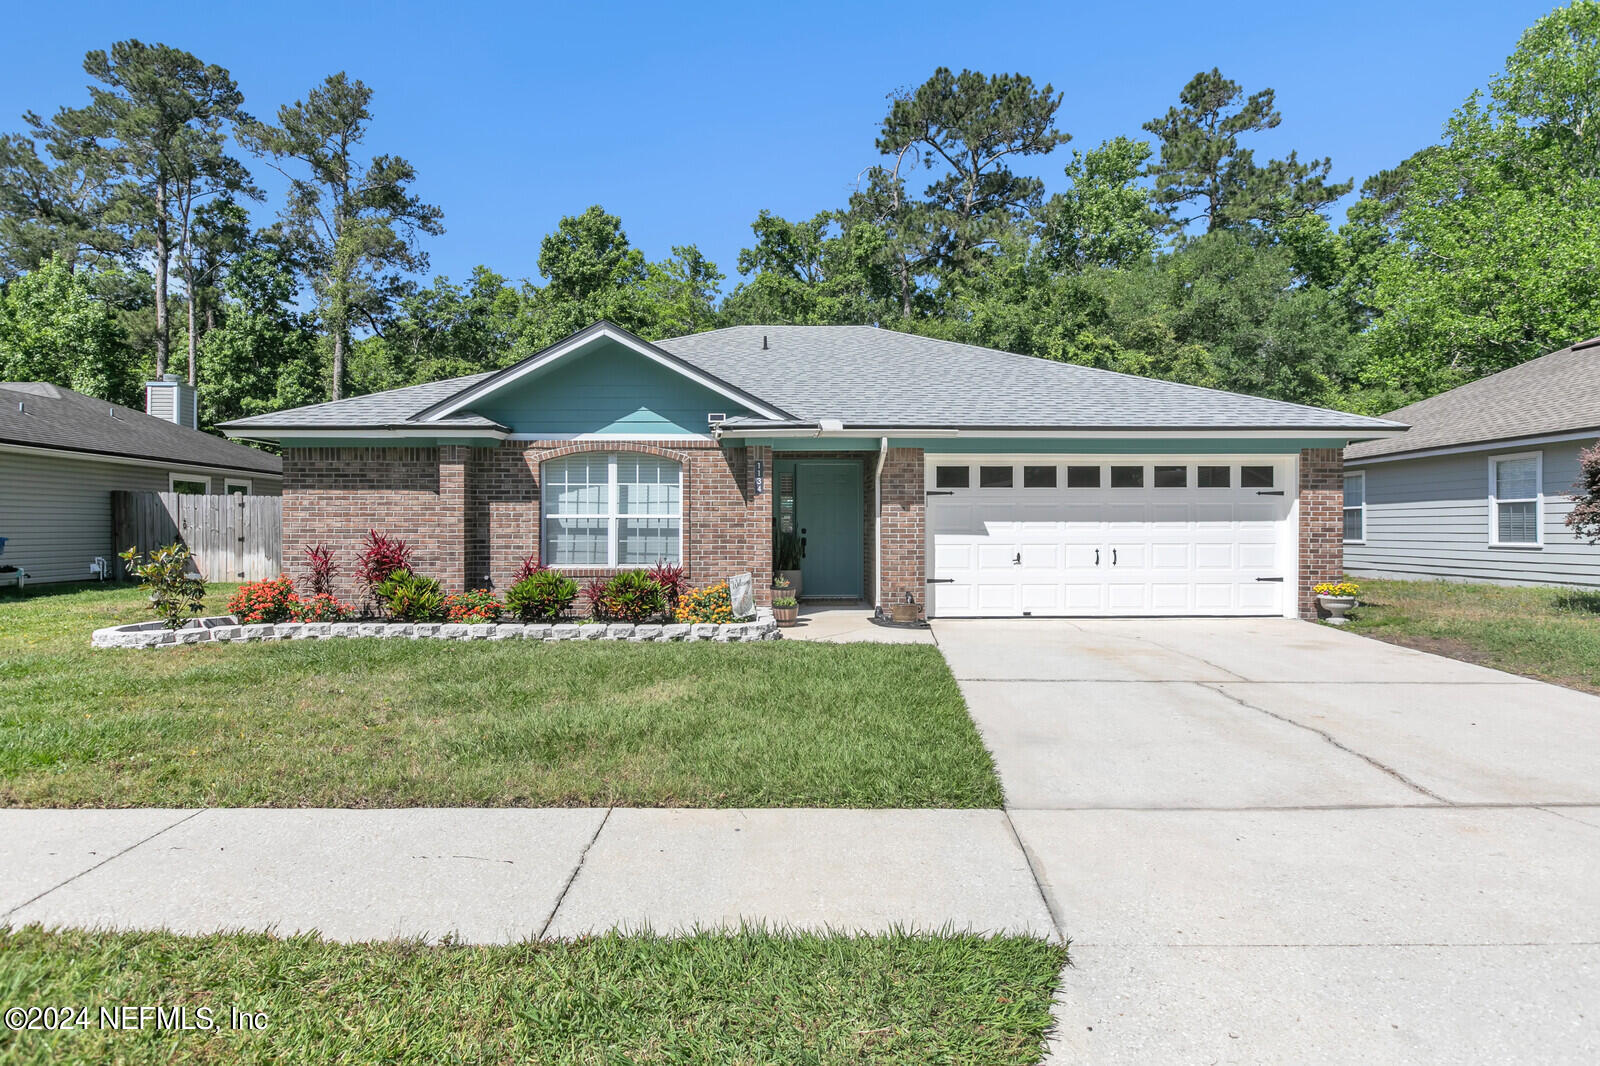 Jacksonville, FL home for sale located at 1134 Windy Willows Drive, Jacksonville, FL 32225